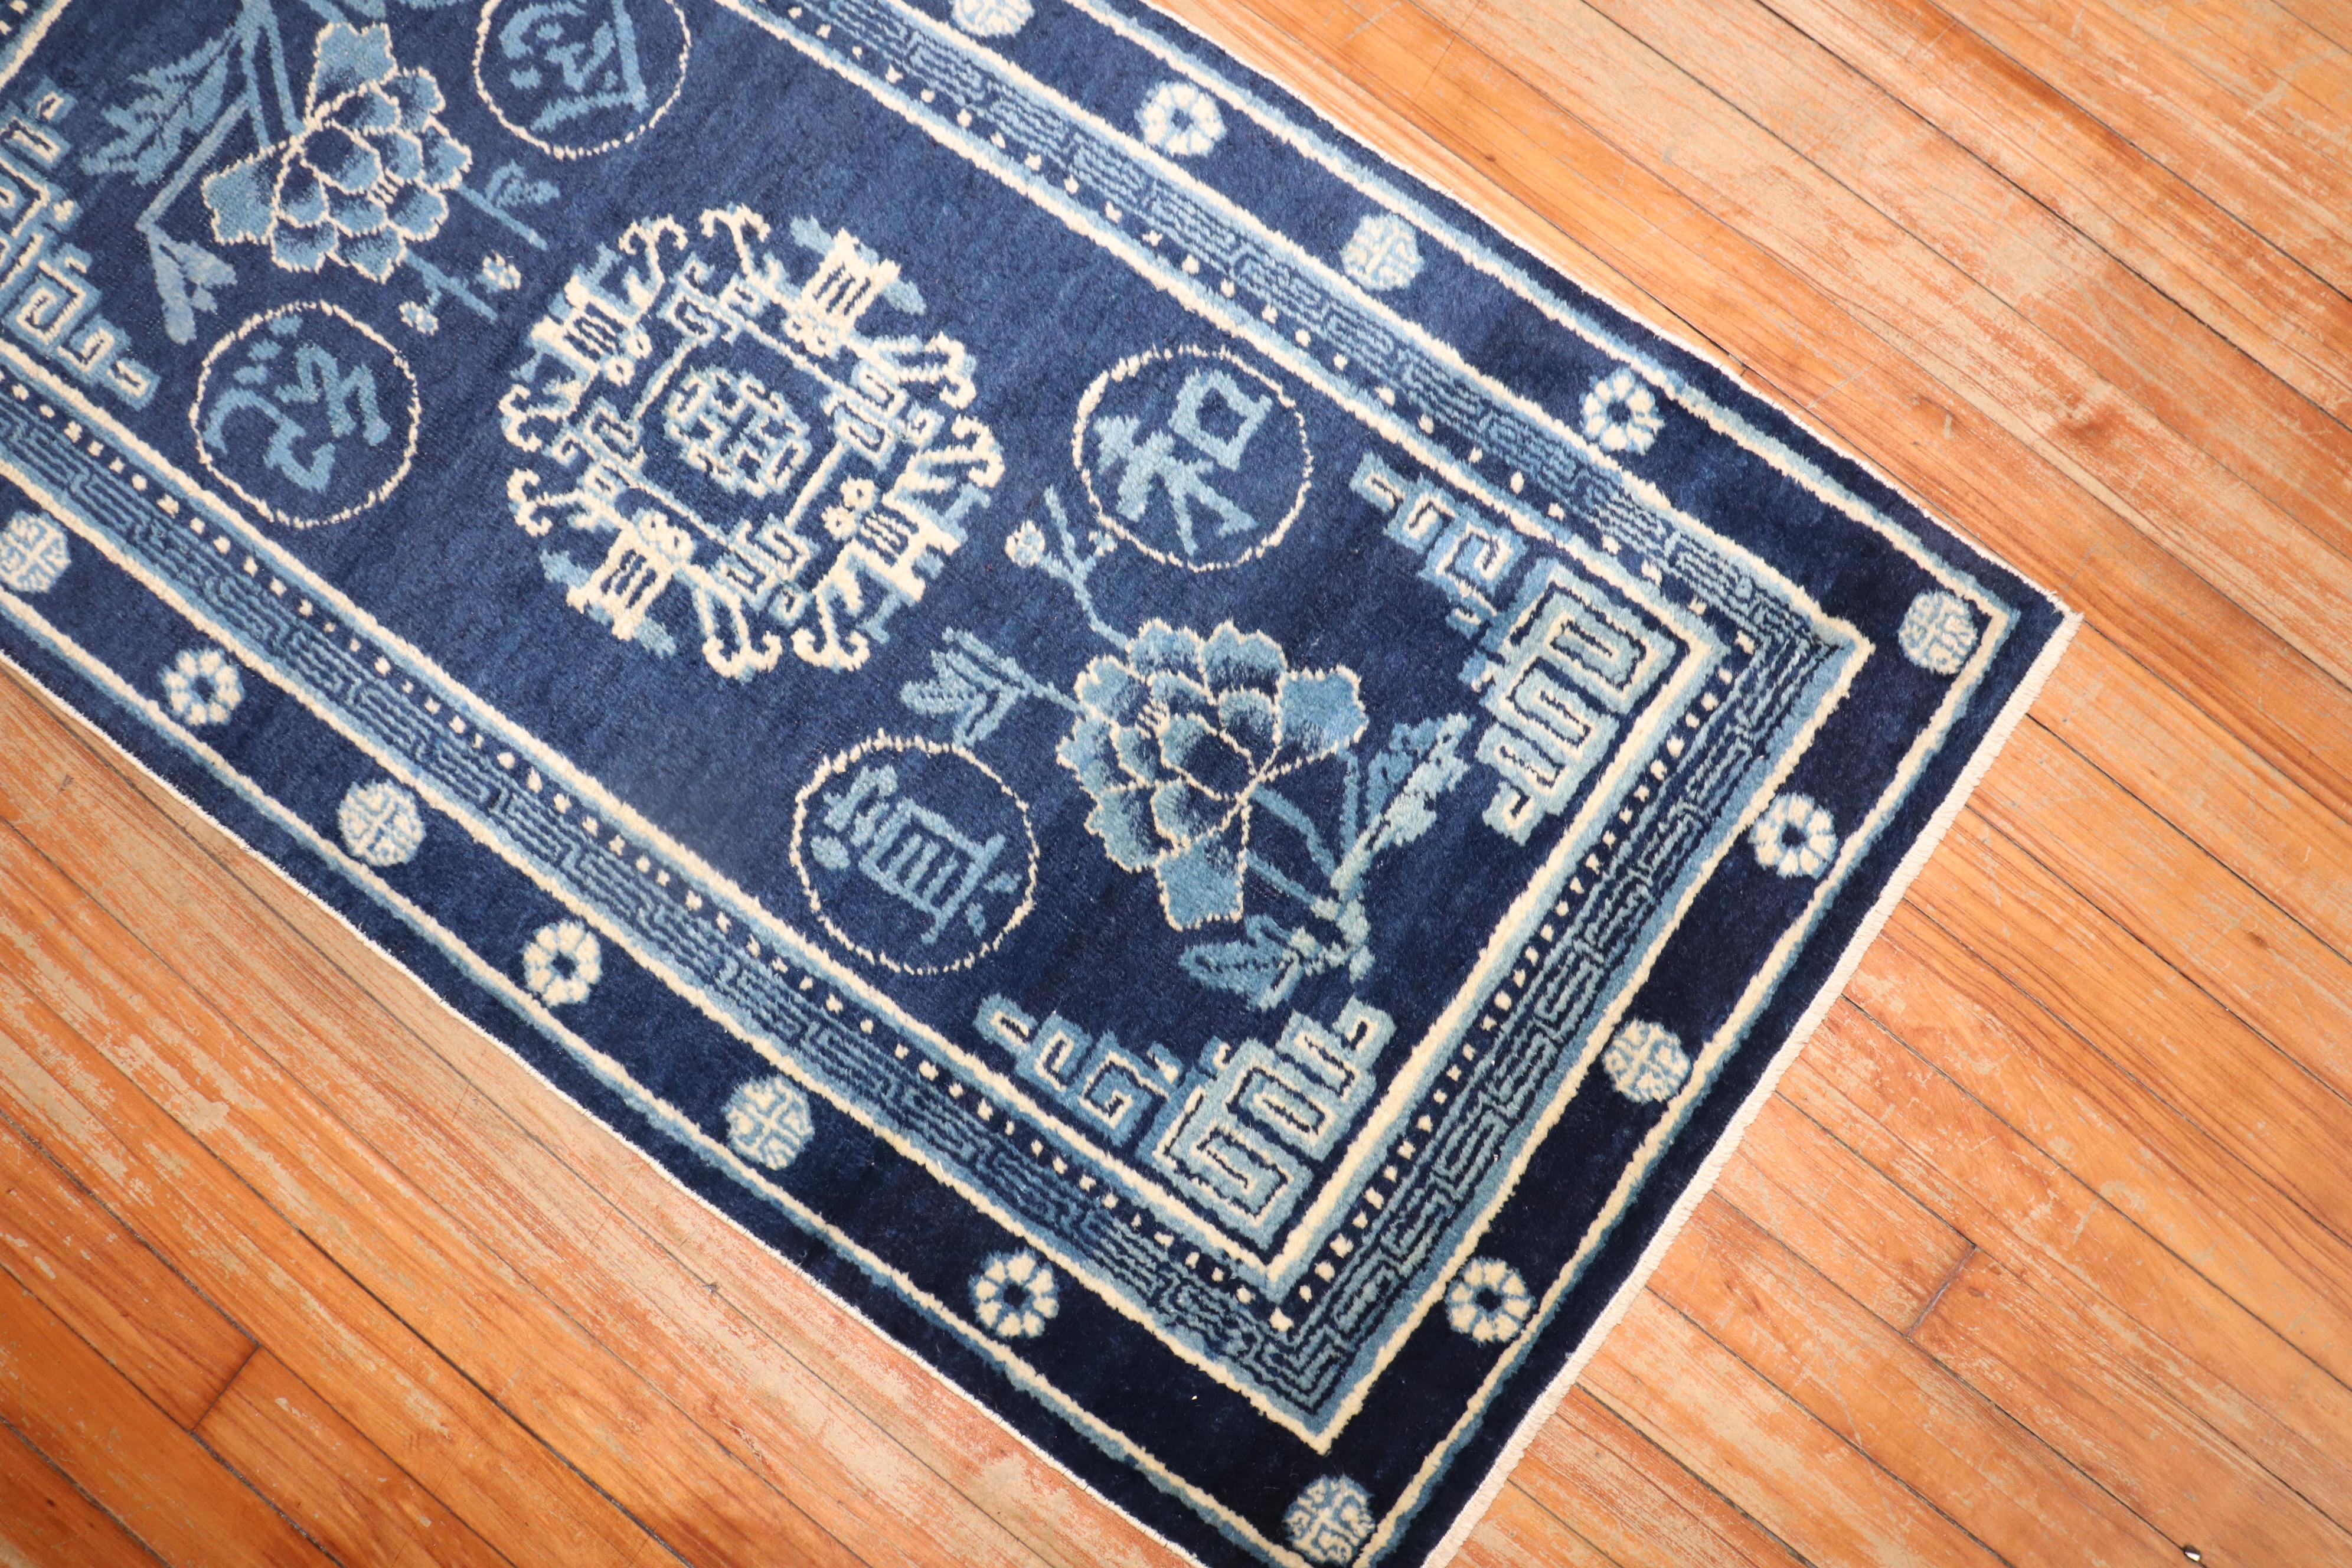 Scatter size Chinese peking rug in blue and white from the 2nd quarter of the 20th century.

Measures: 2'2